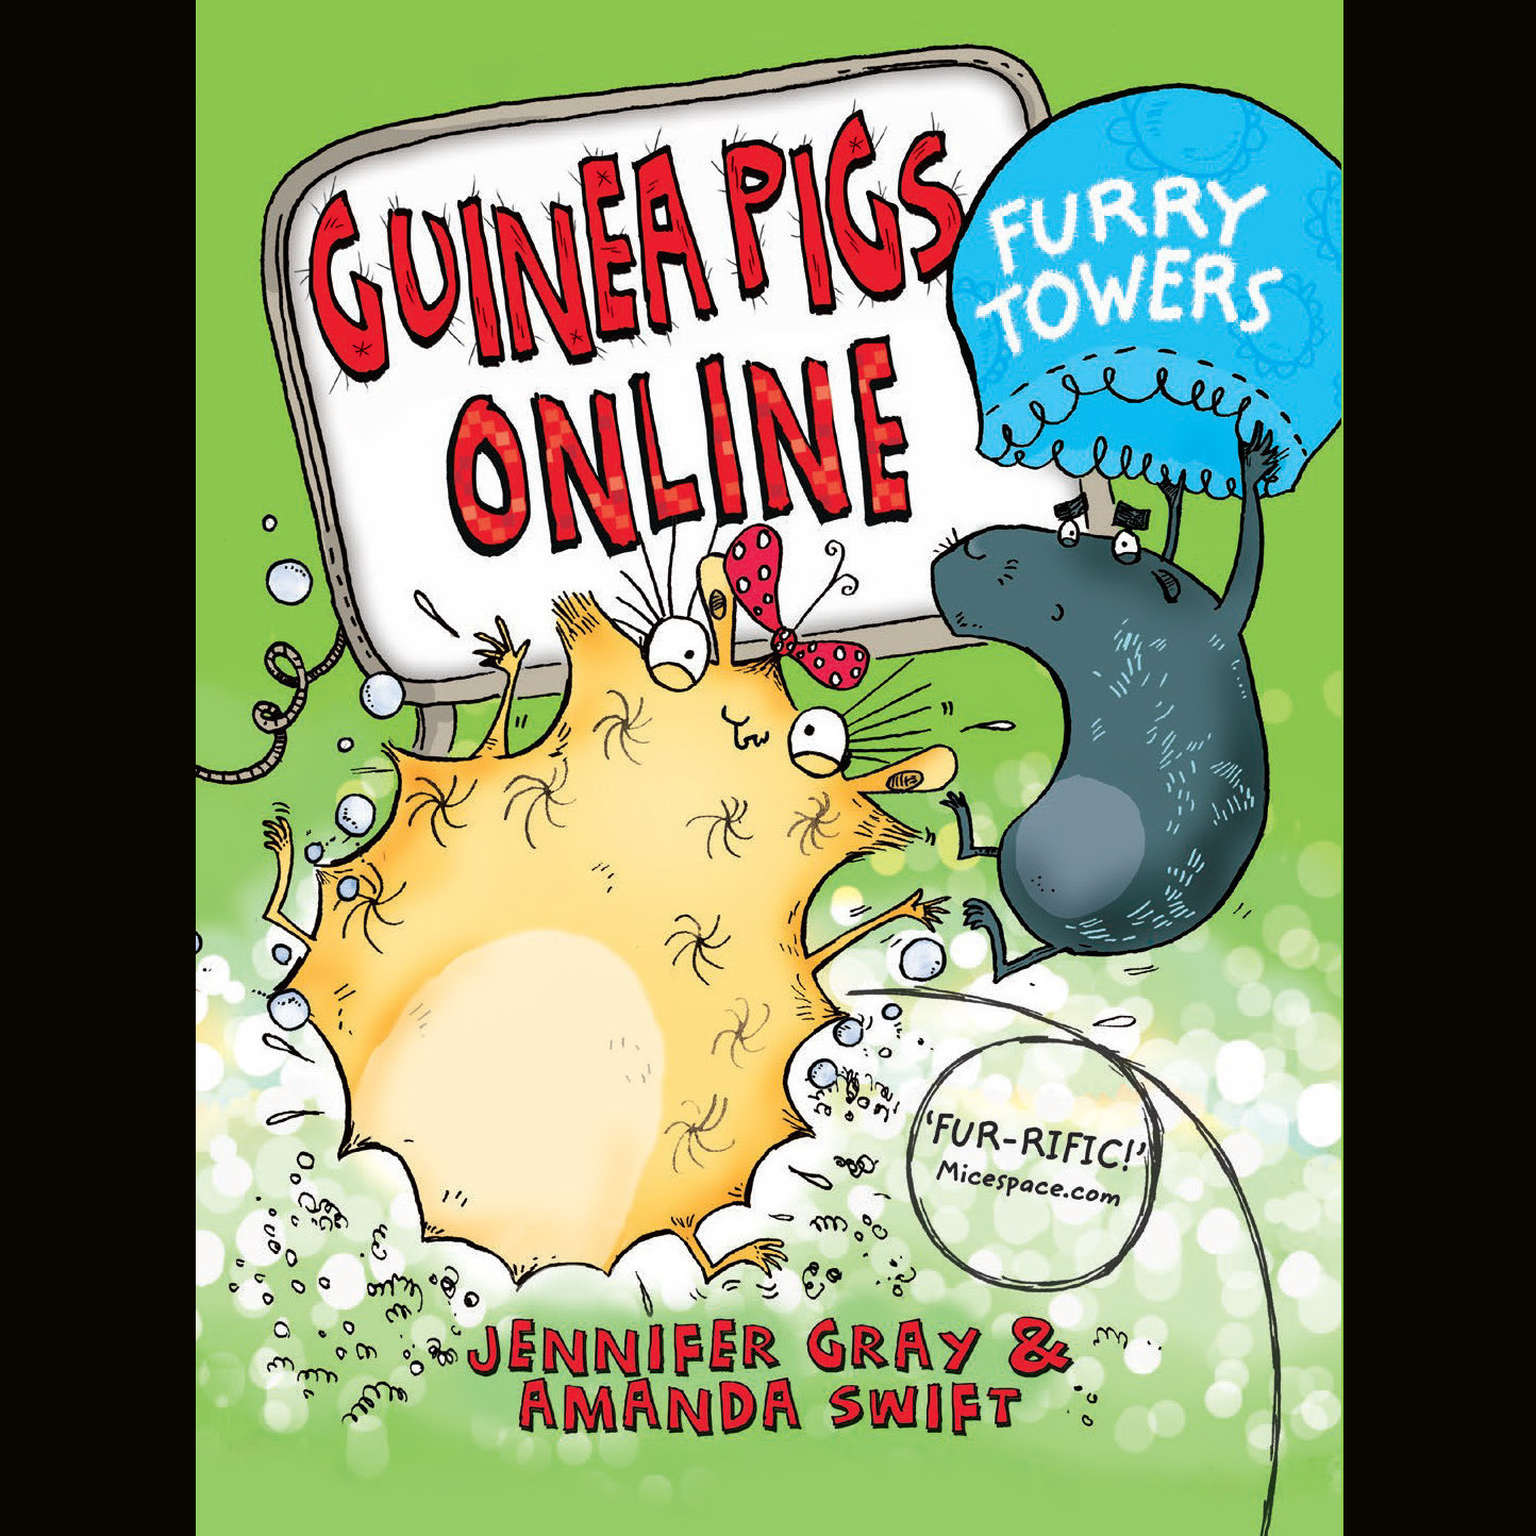 Guinea Pigs Online: Furry Towers Audiobook, by Sarah Horne